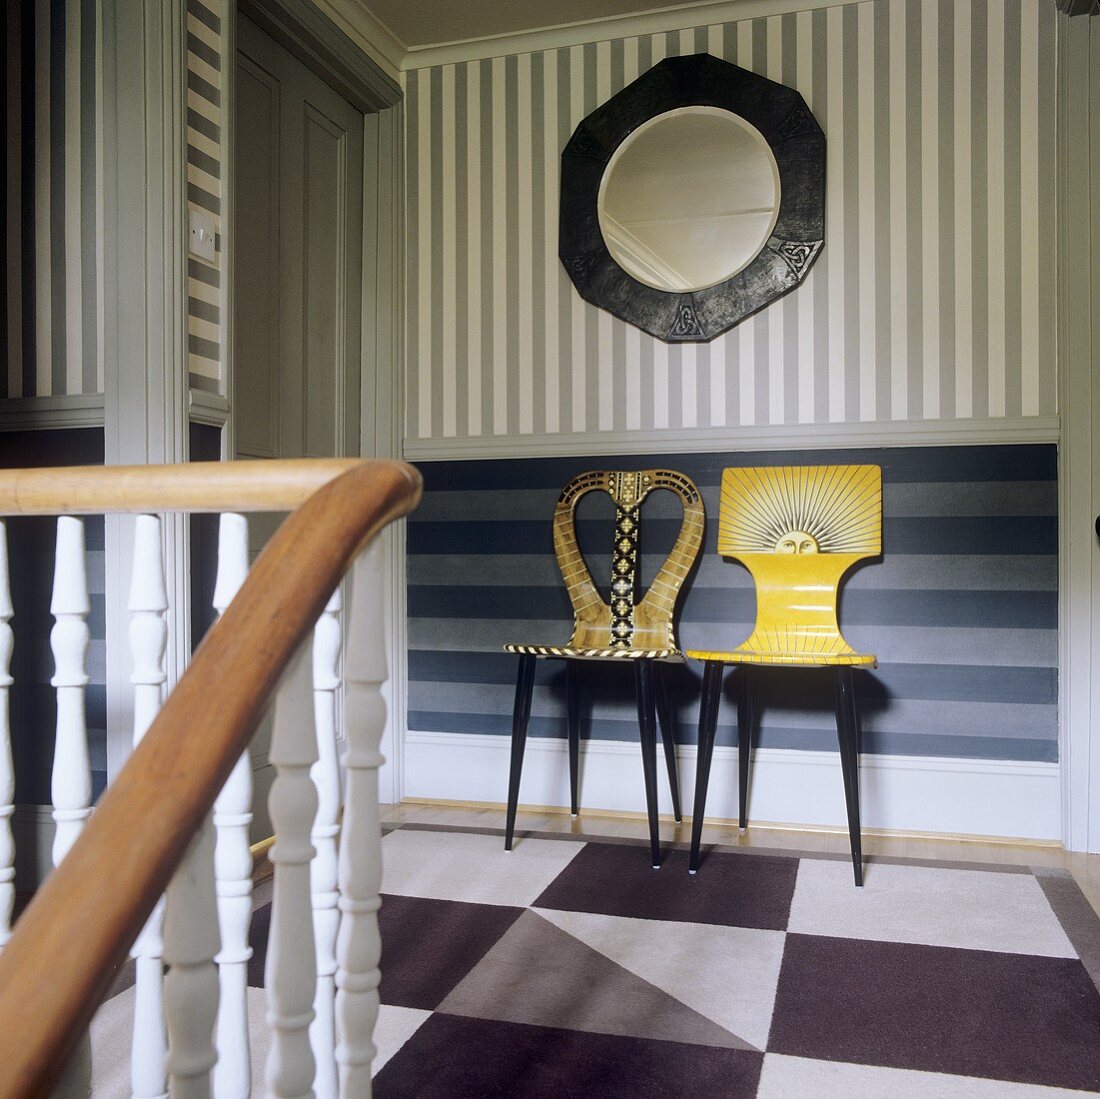 Artistically painted chairs against a striped wall in a stairway